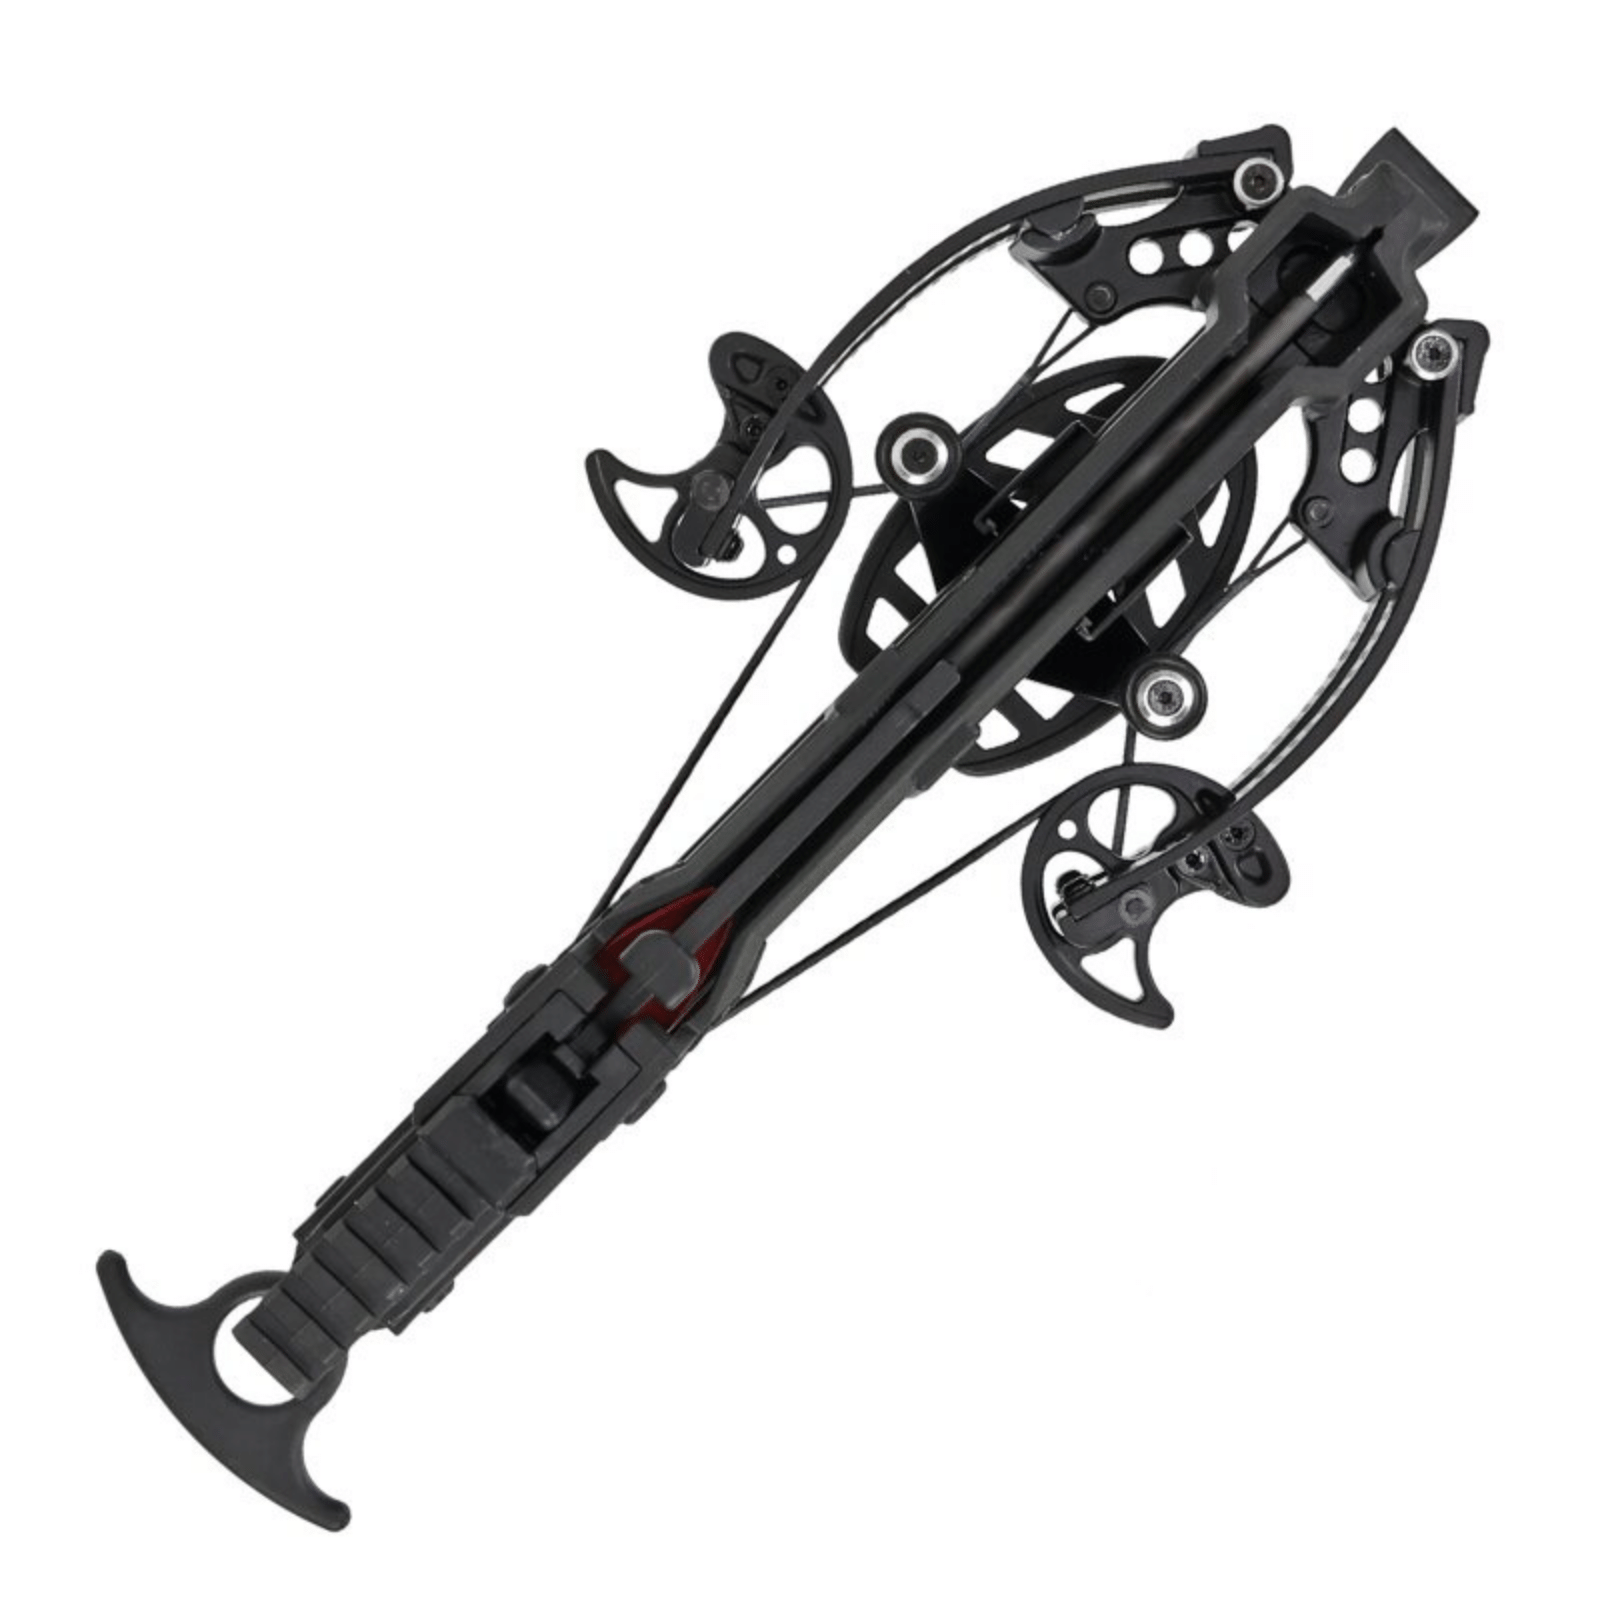 40/50/60lb Archery Foldable Bow Folding Hunting Tactical Survival Bow  Bowfishing